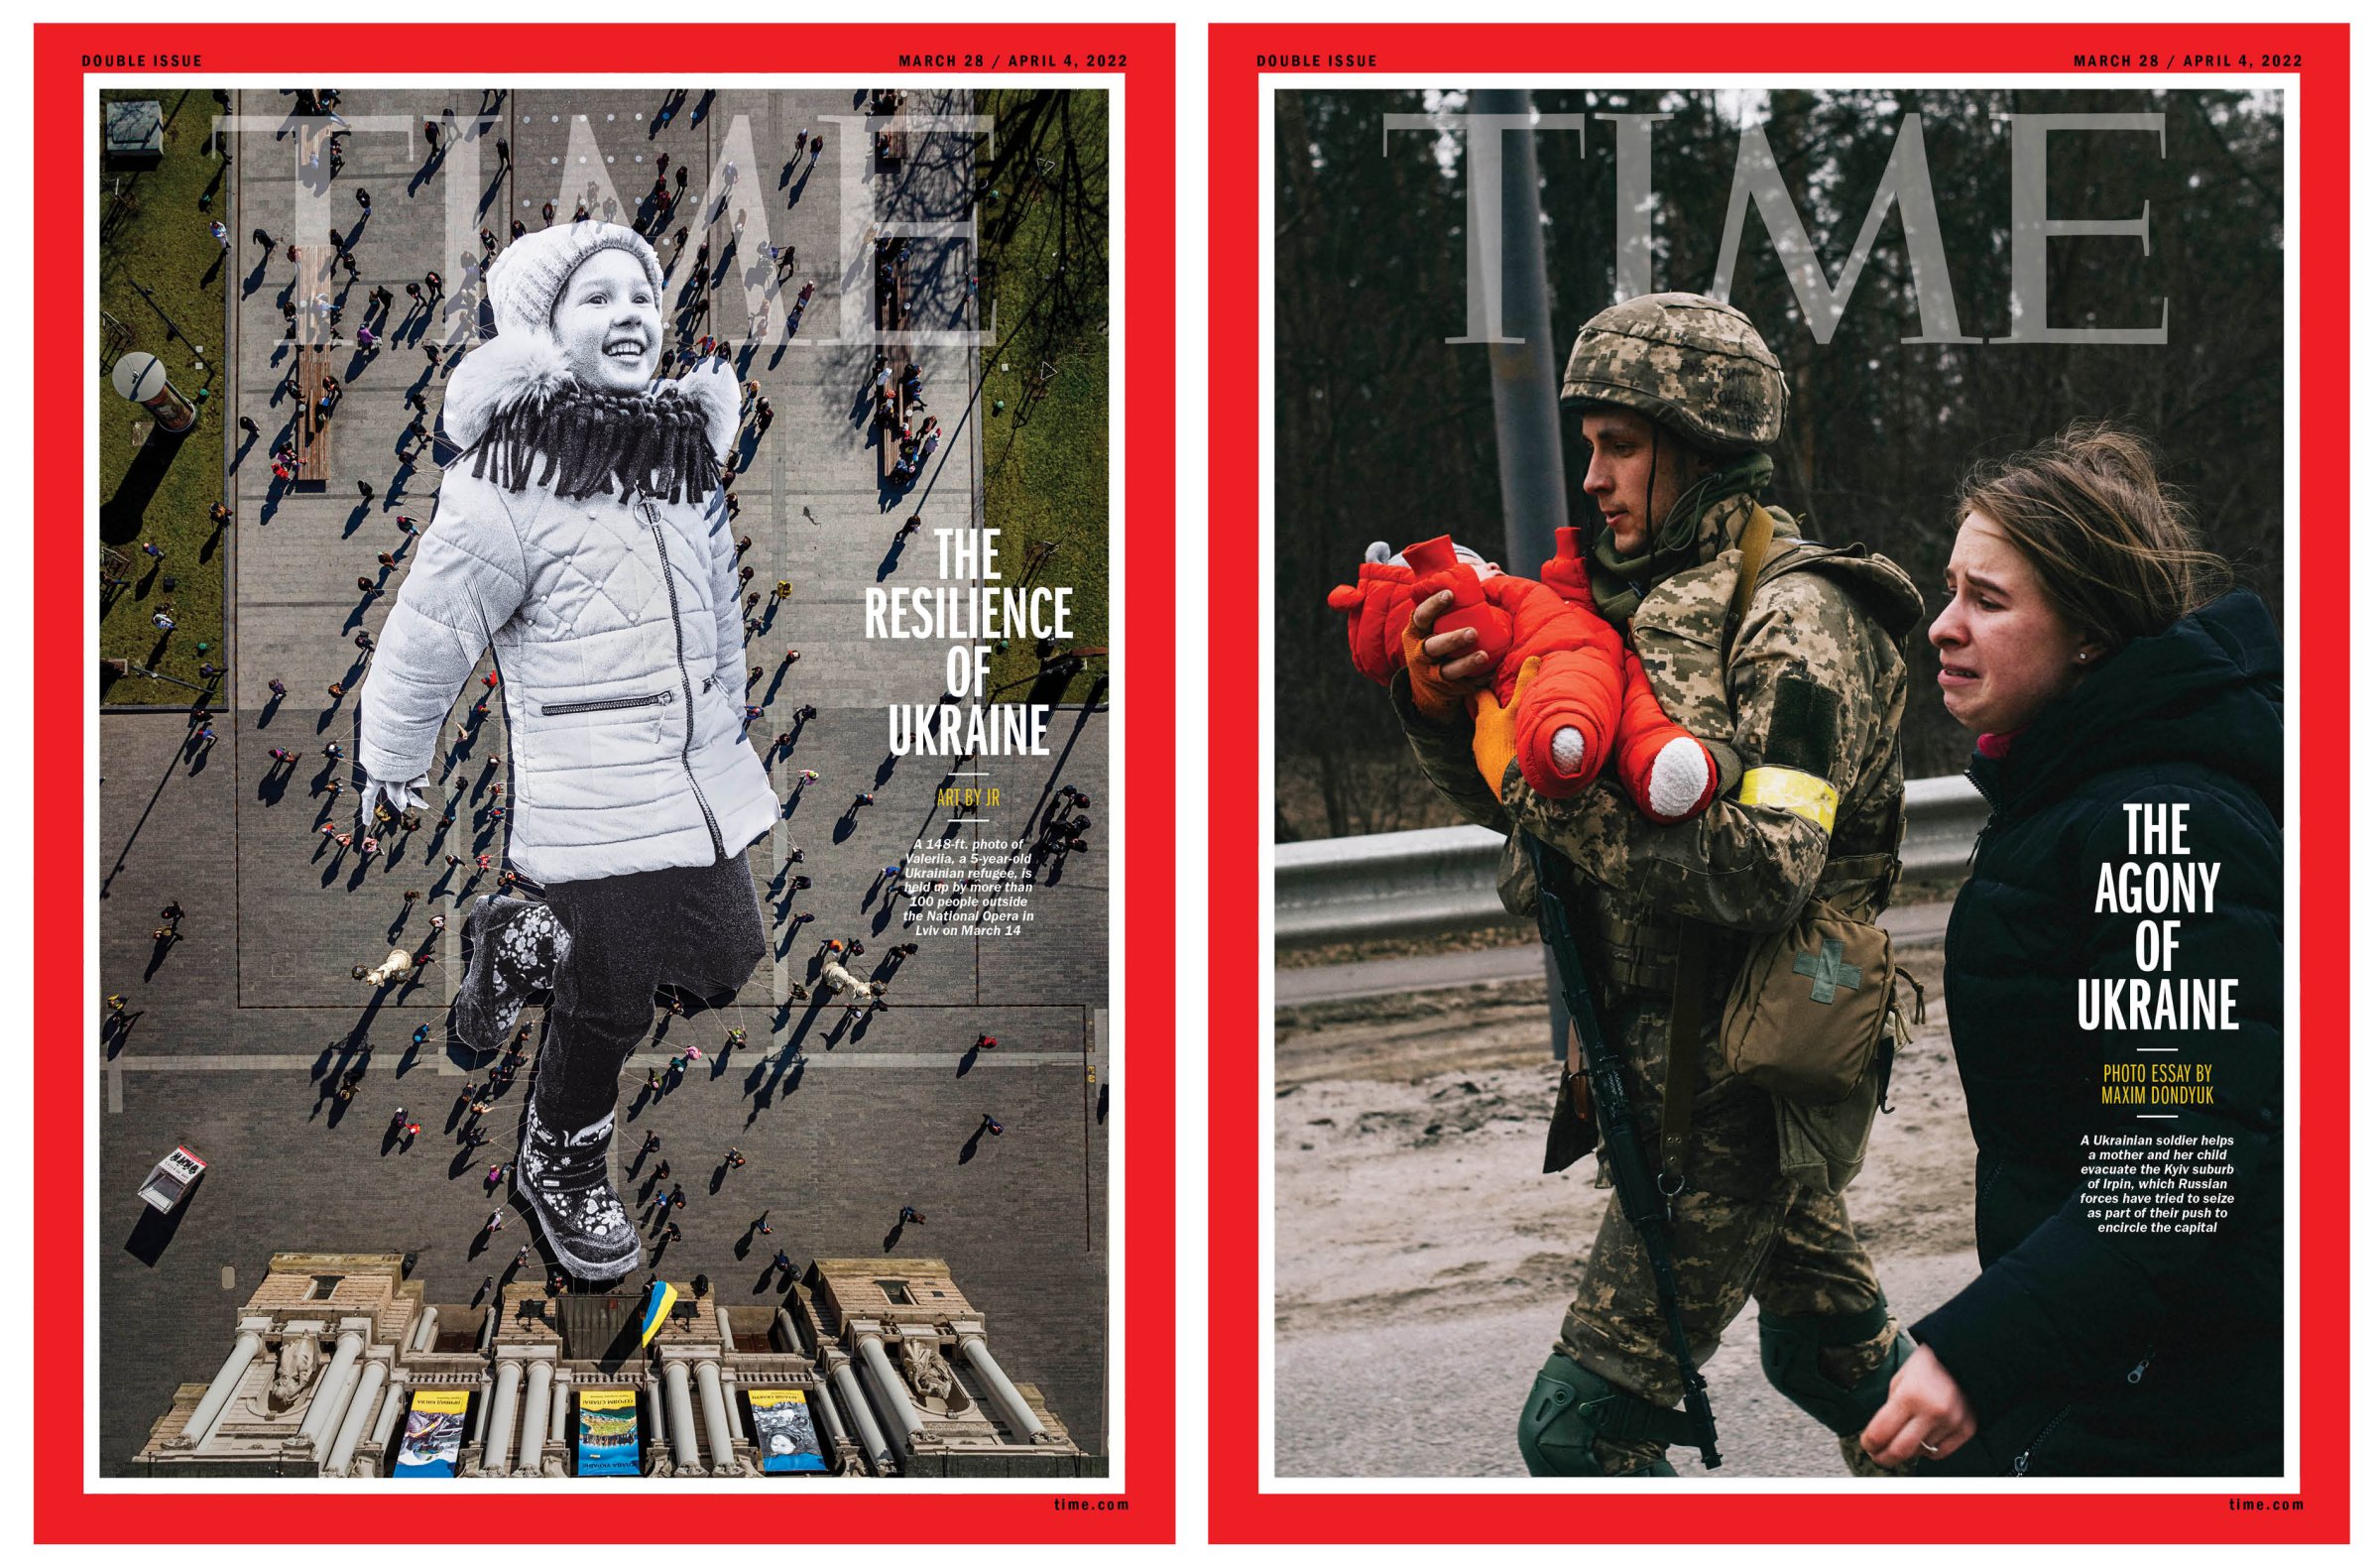 The Resilience and Agony of Ukraine Time Magazine covers